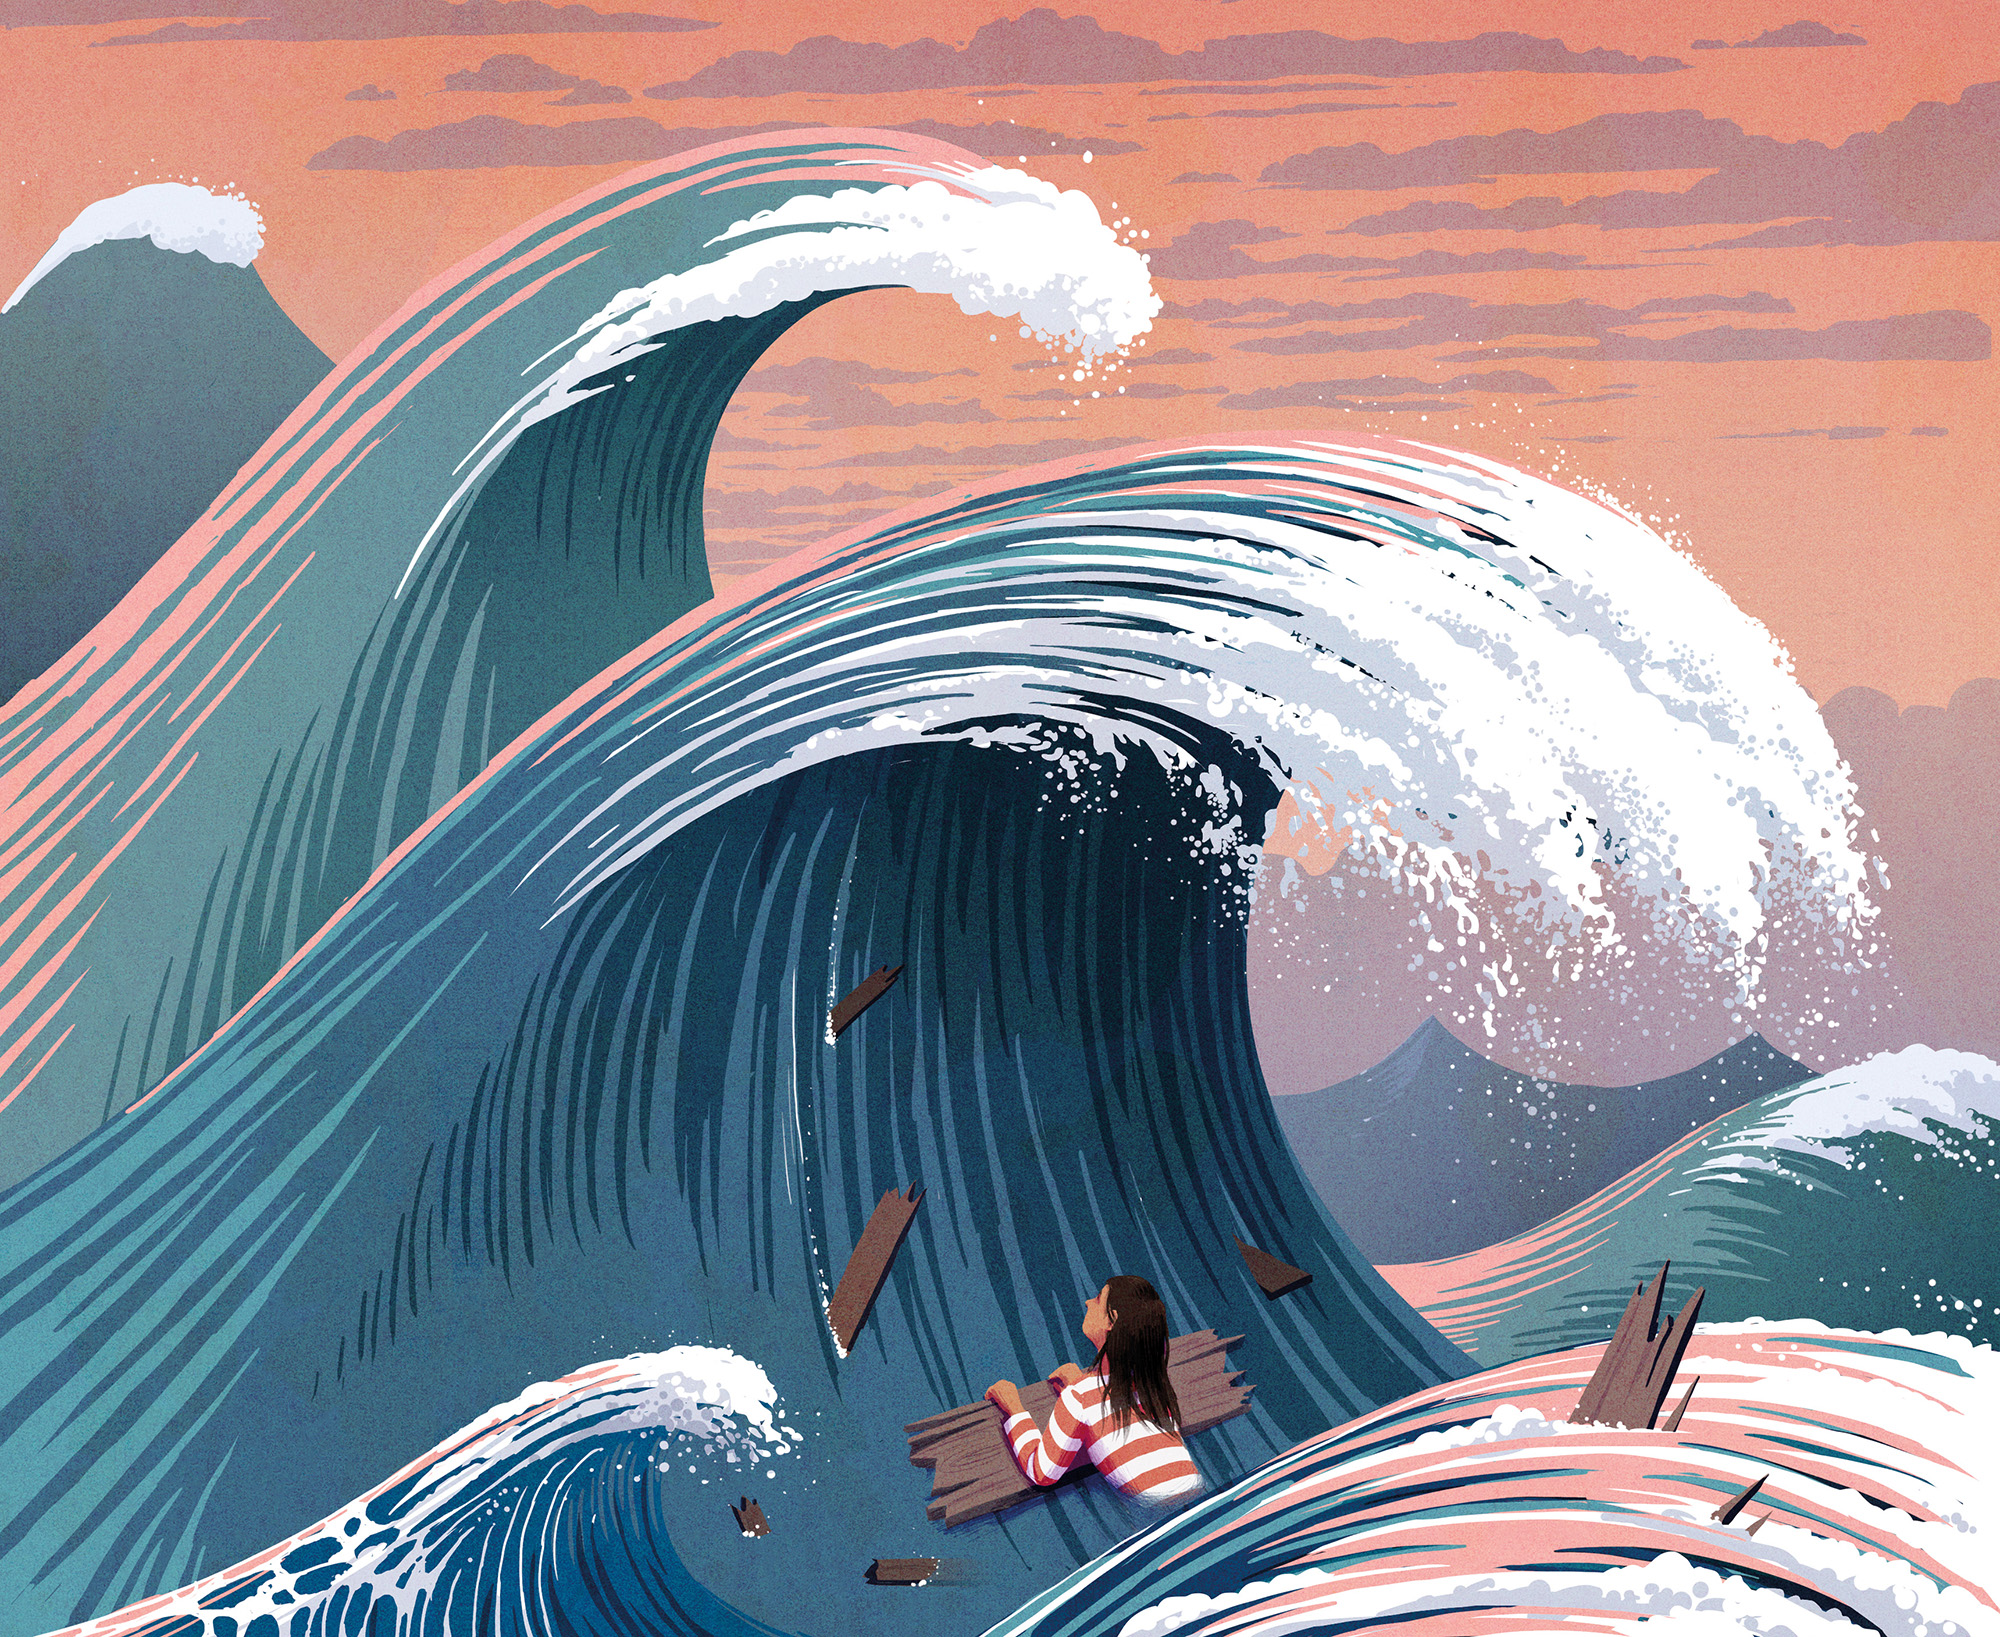 An illustration shows huge ocean waves threatening to overtake a woman clinging to a scrap of driftwood.